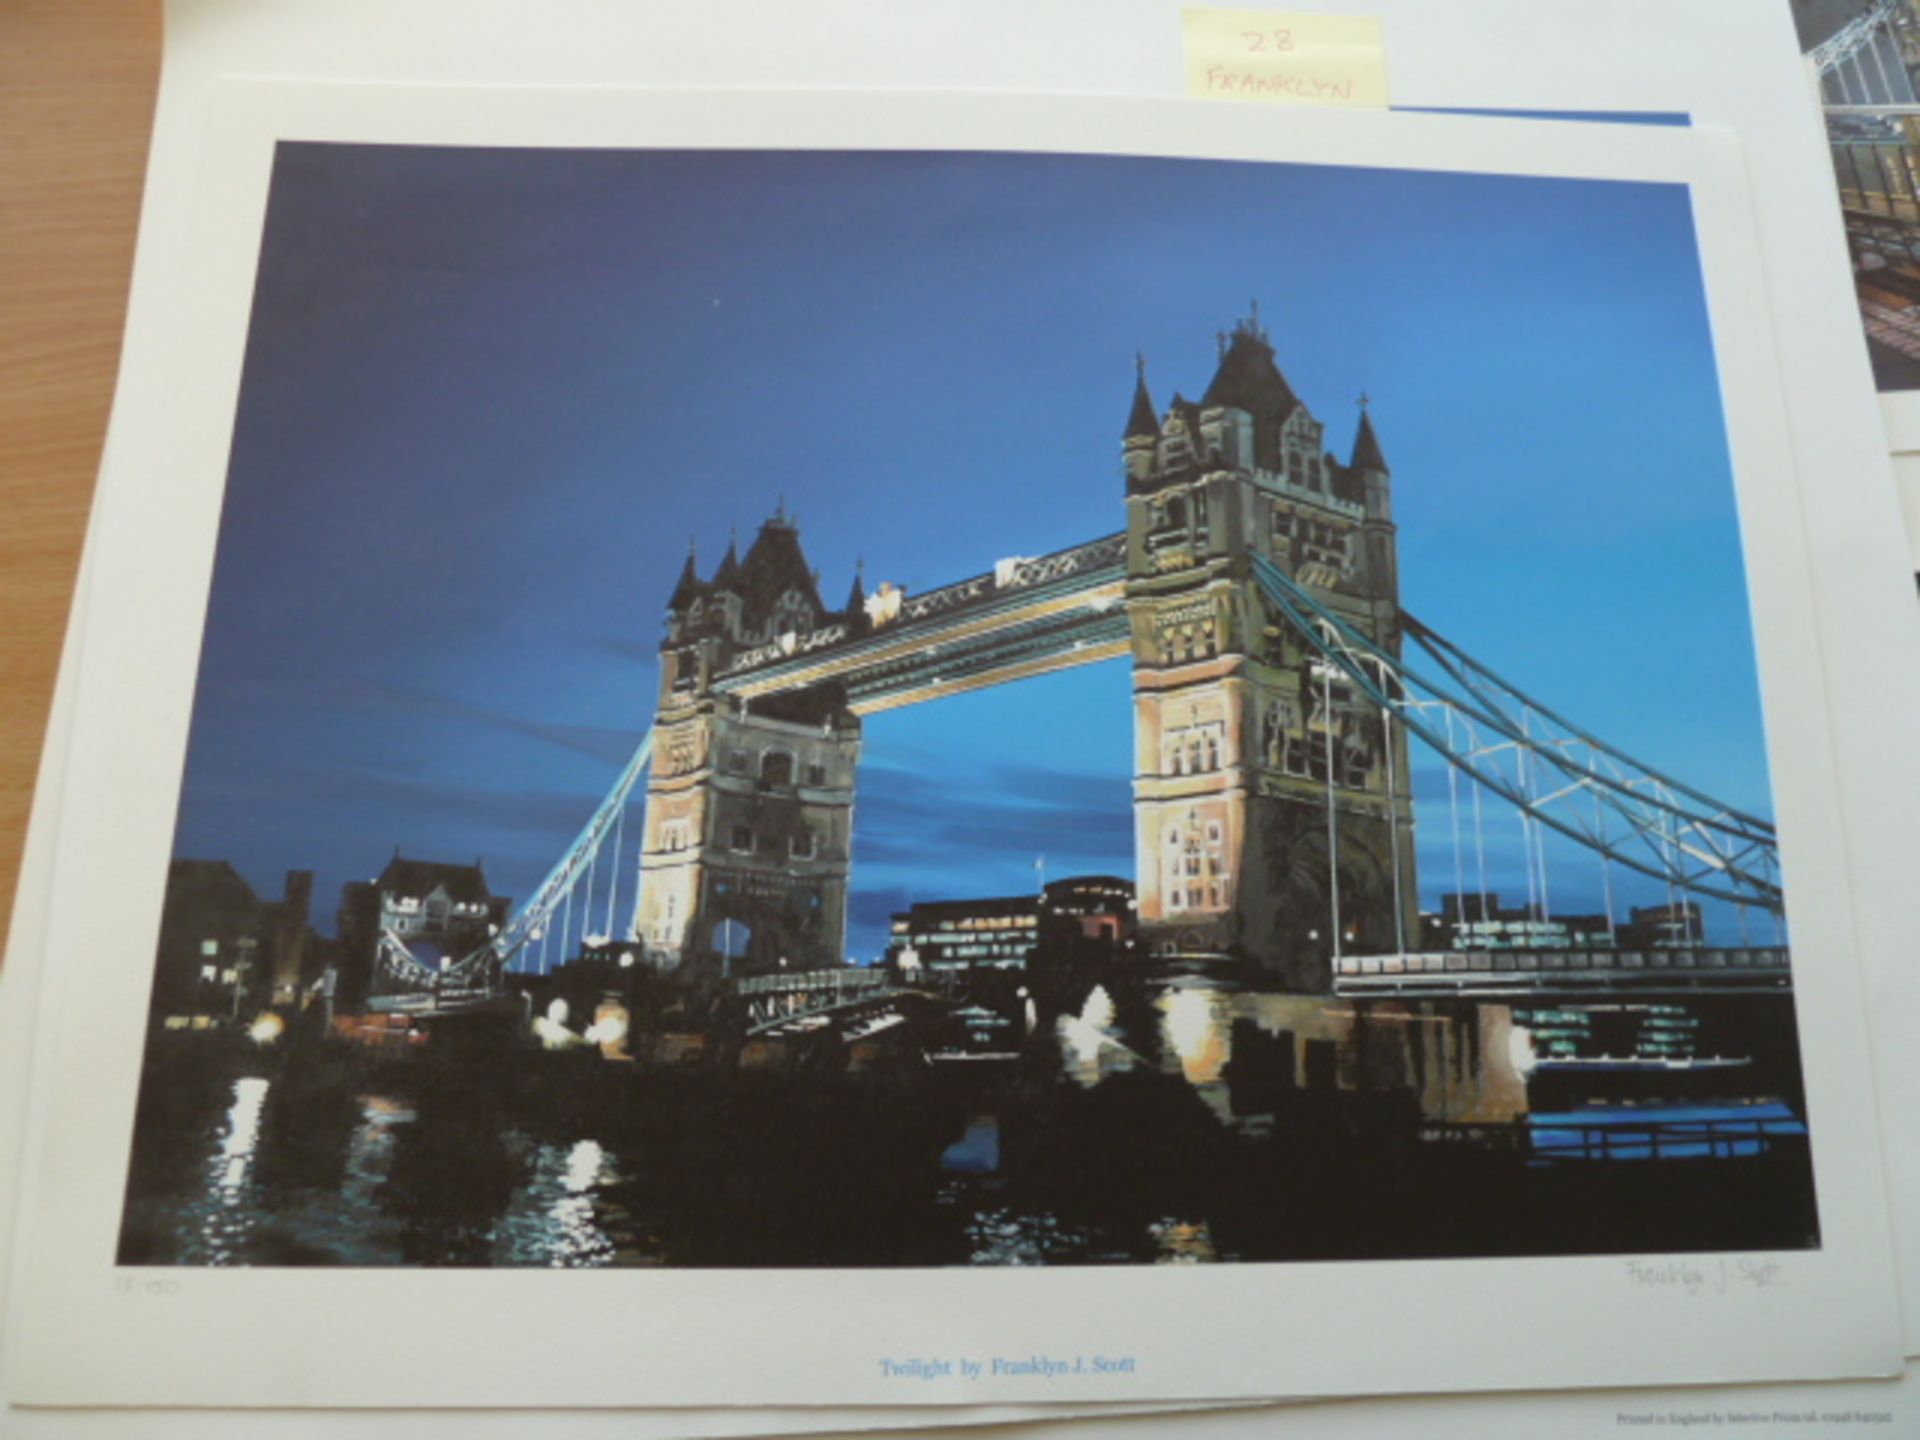 28 X LIMITED EDITION SIGNED UNMOUNTED PRINTS - 6X TWILIGHT, 4X EVENING AT WESTMINSTER, 5X BUCKINGHAM